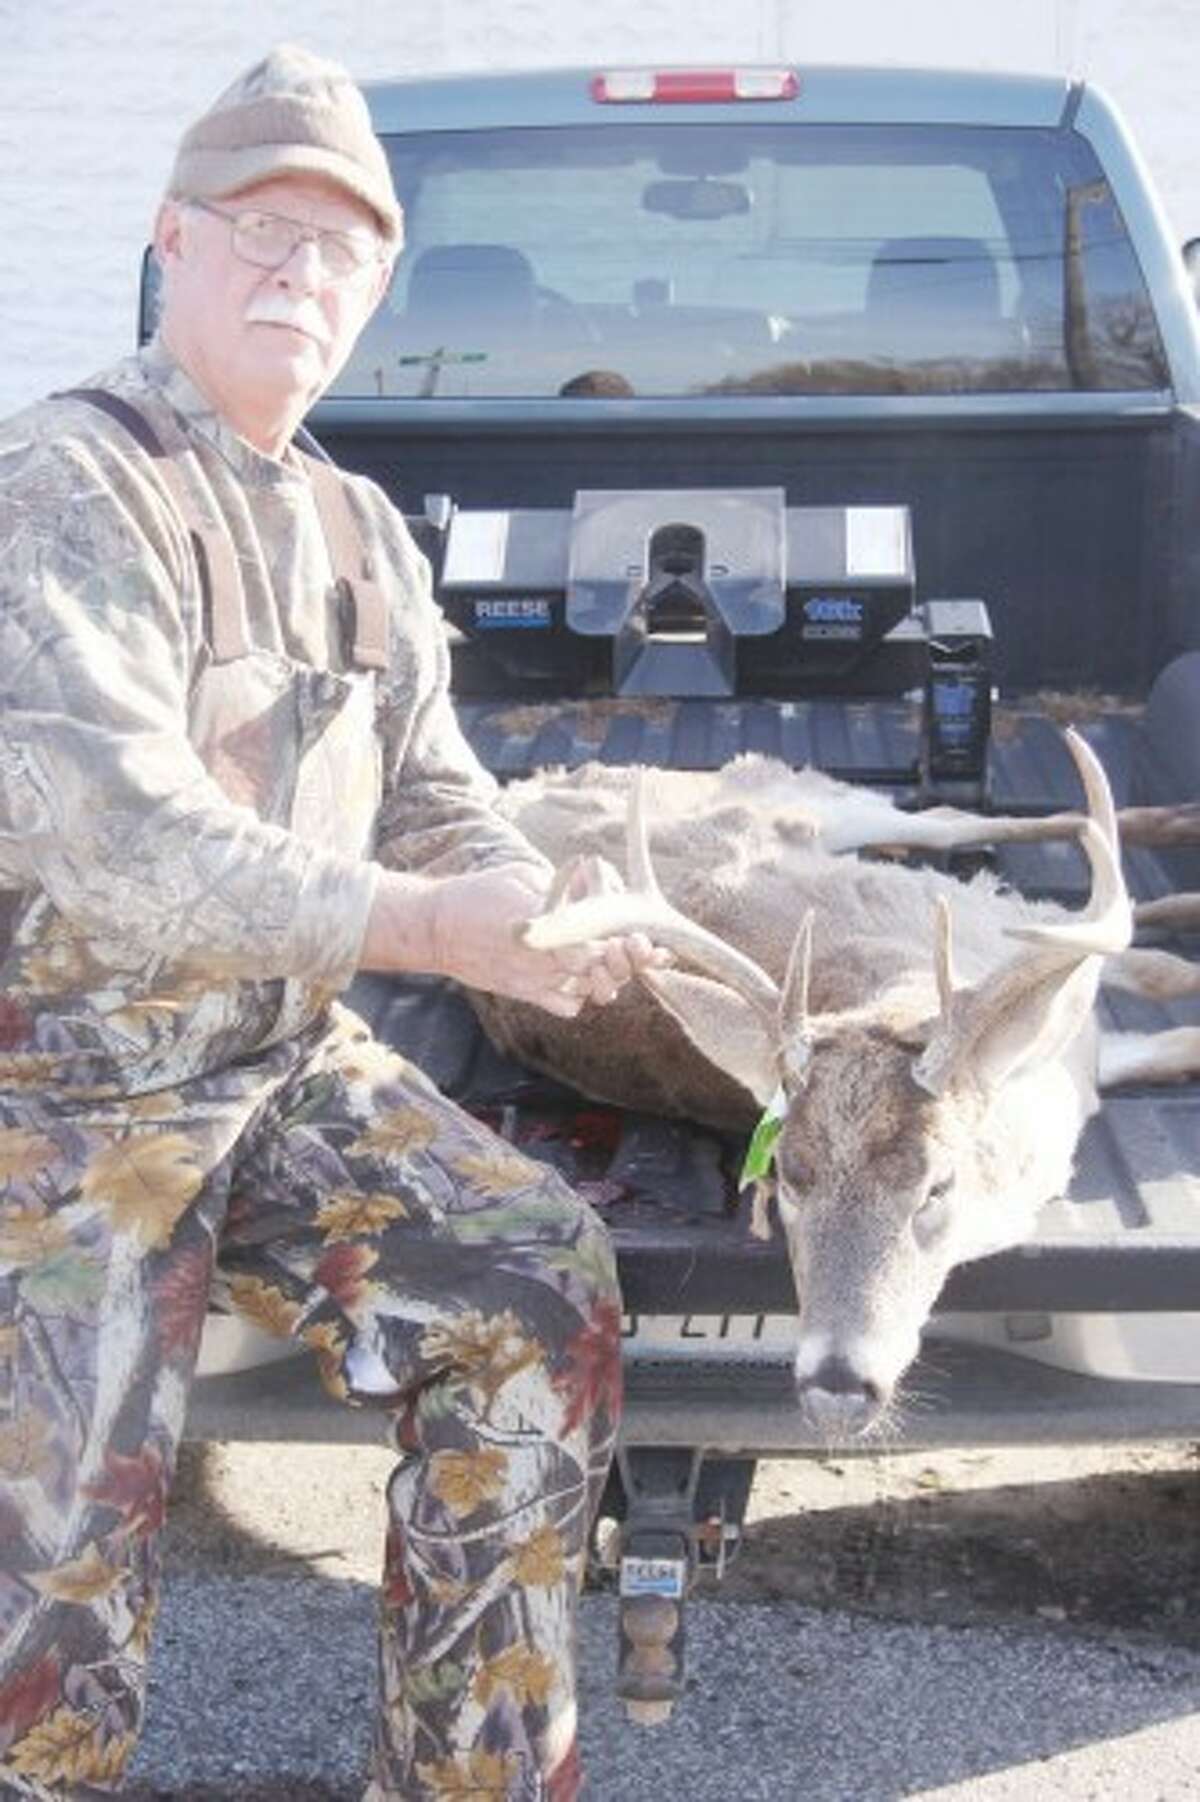 First Place honors go to David Hubbard who shot a beautiful 9 point buck with a spread of 18 1/2 inches in the Emerald Lake area.